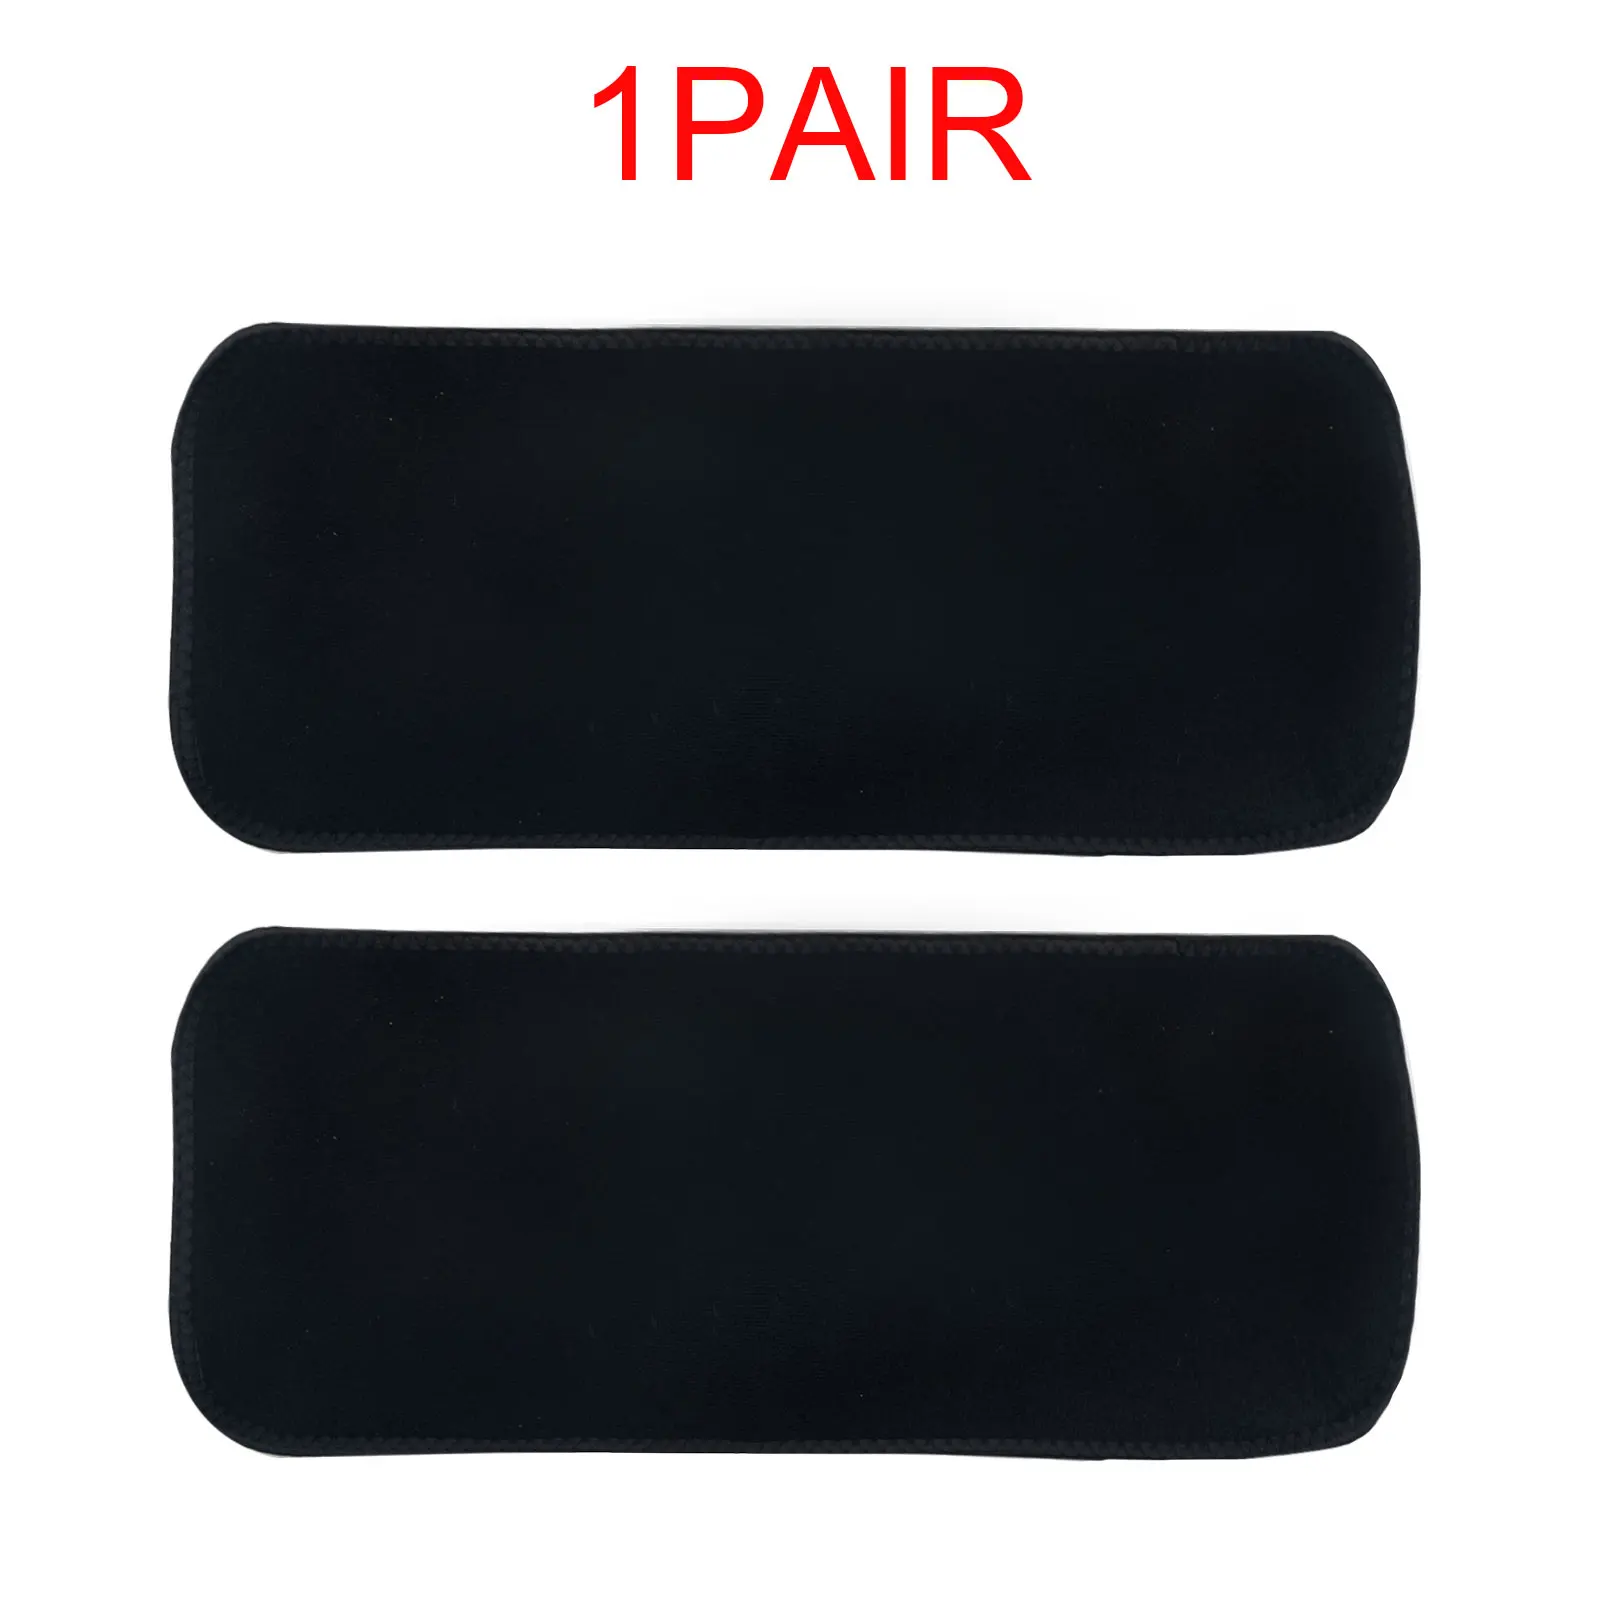 

1pair Women Trainer Sweat Band Fat Burning Weight Loss Arm Trimmers Yoga Slimmer Sports Adjustable Wraps Workout Sauna Shaper